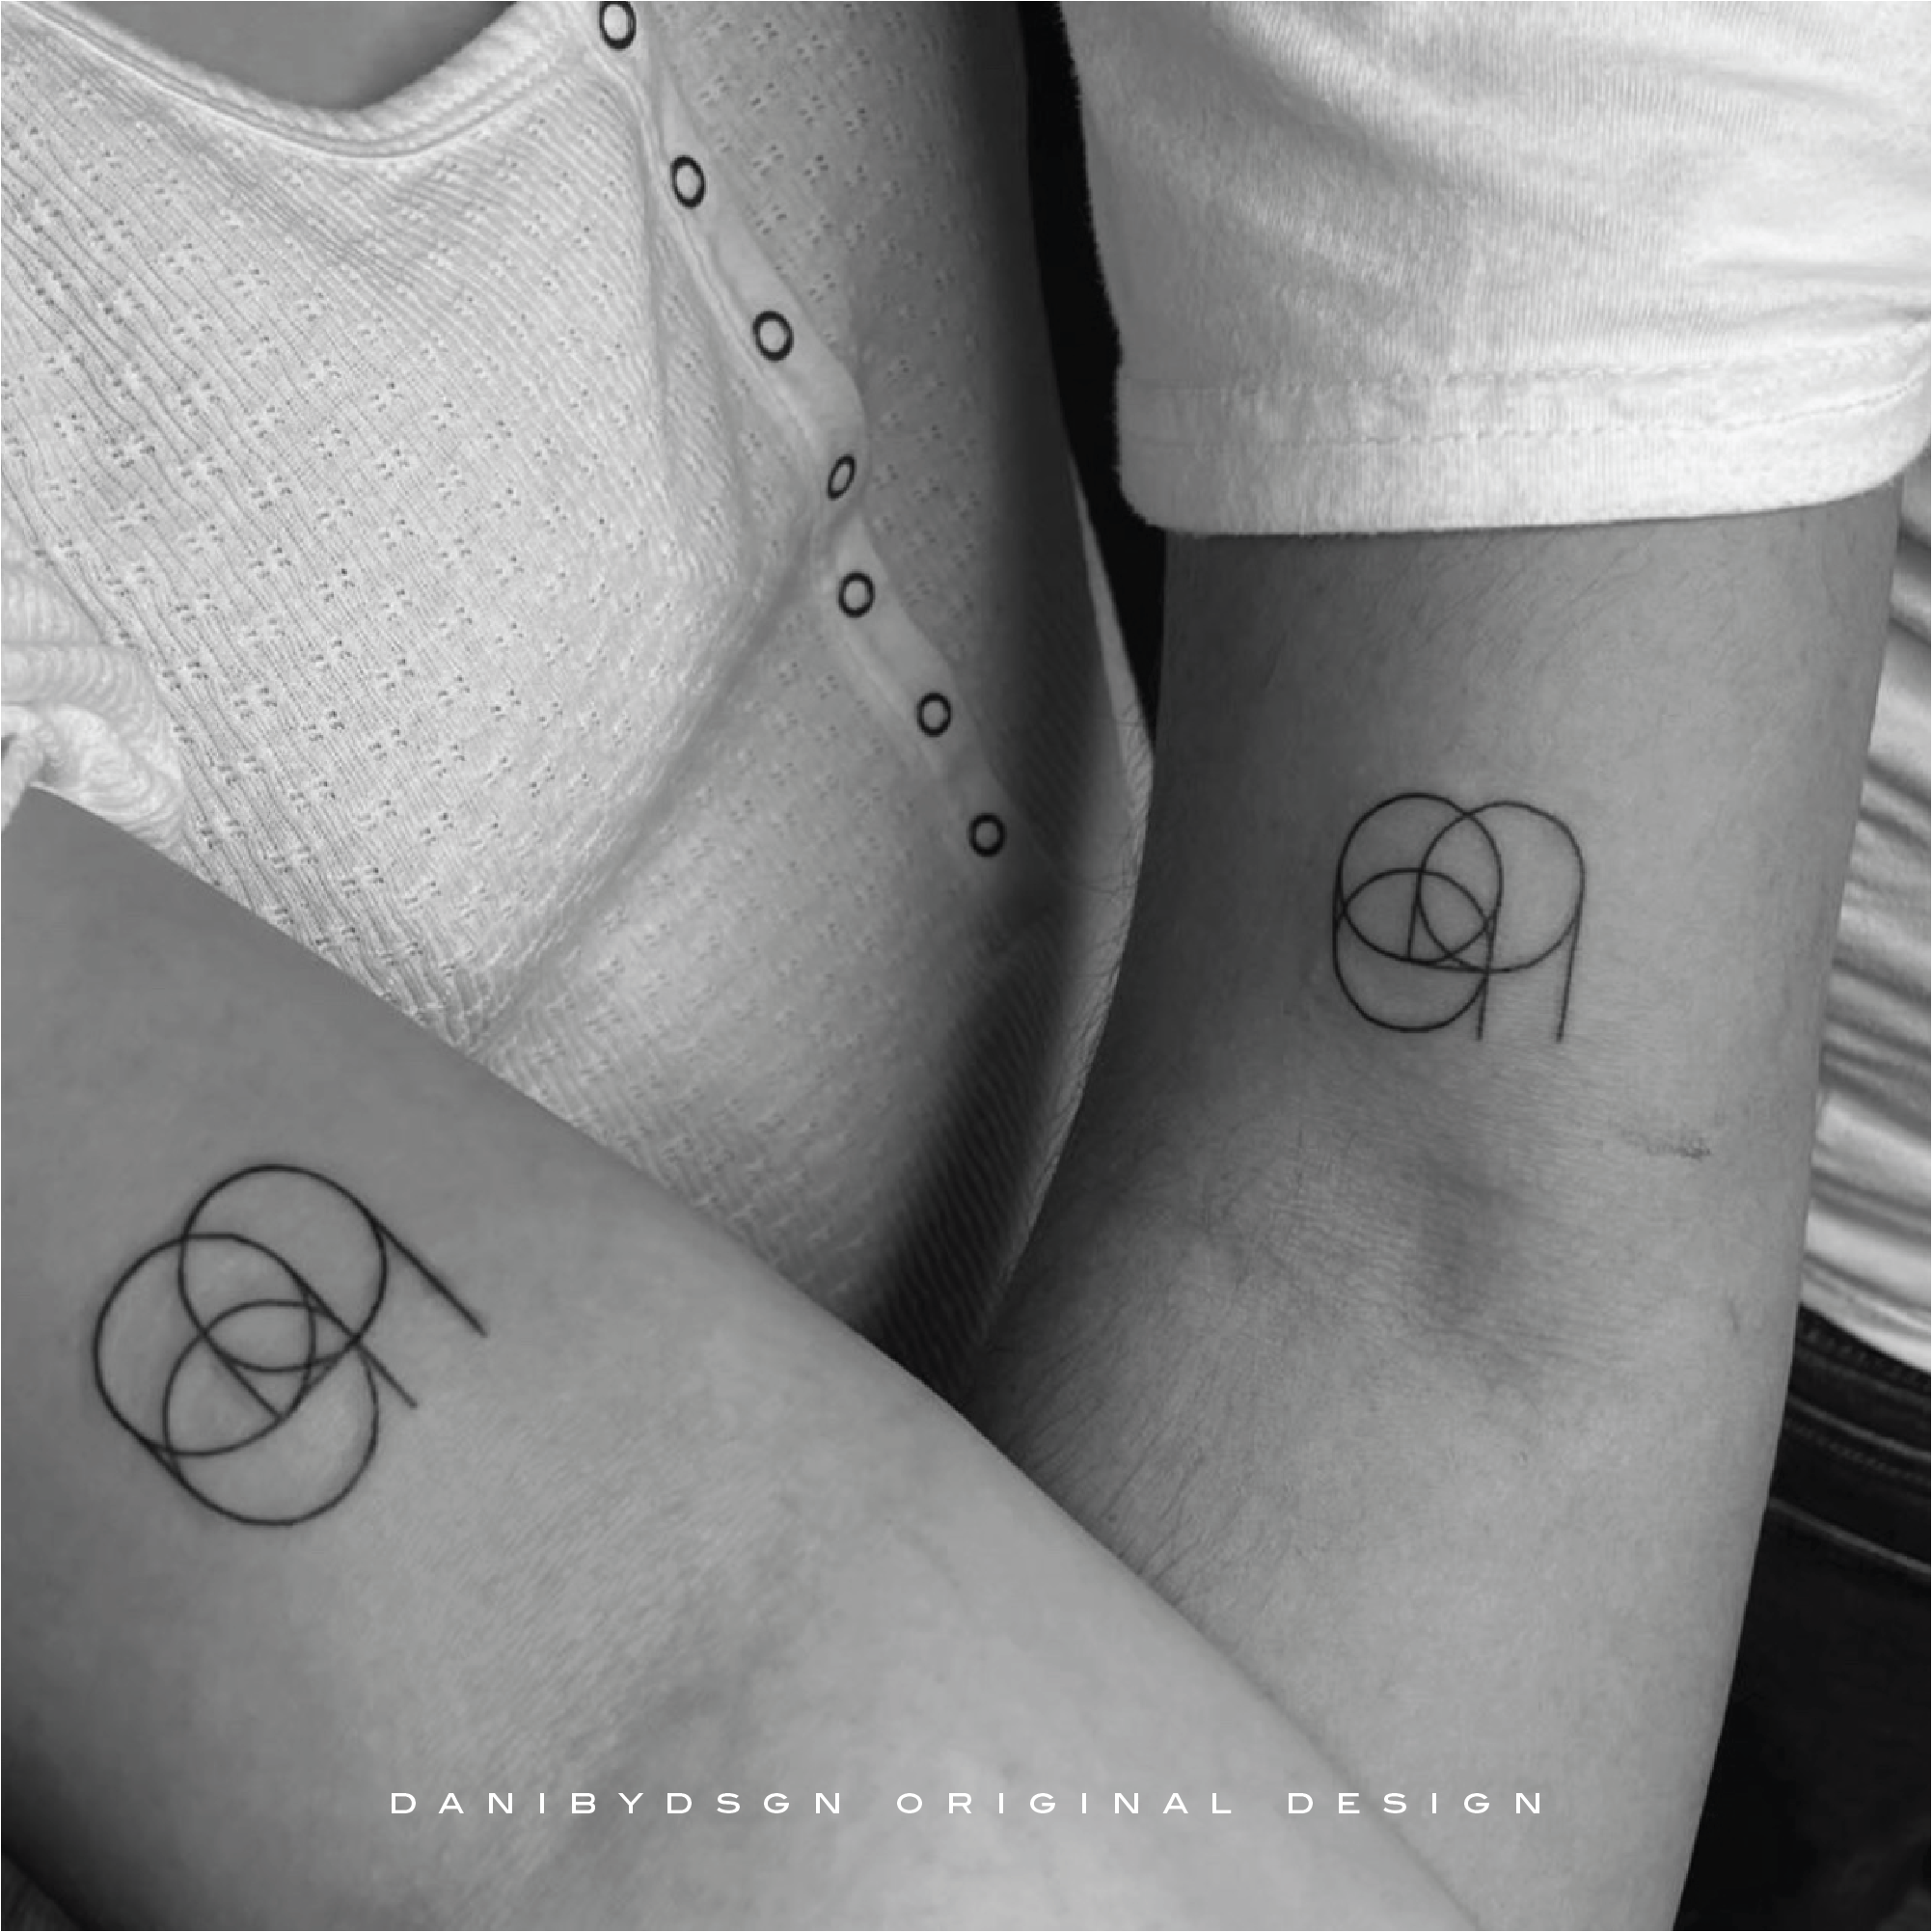 A black and white photograph captures a couple's arms each adorned with a matching single-symbol fineline tattoo representing their wedding date, created by Danibydsgn the original name logo designer. These tattoos are a unique expression of their shared journey, reflecting the duo's personal story through Danibydsgn’s custom design work. Danibydsgn has a reputation for excellence in personal branding and graphic design and has become the go to person for unique, elegant, meaningful logo designs.